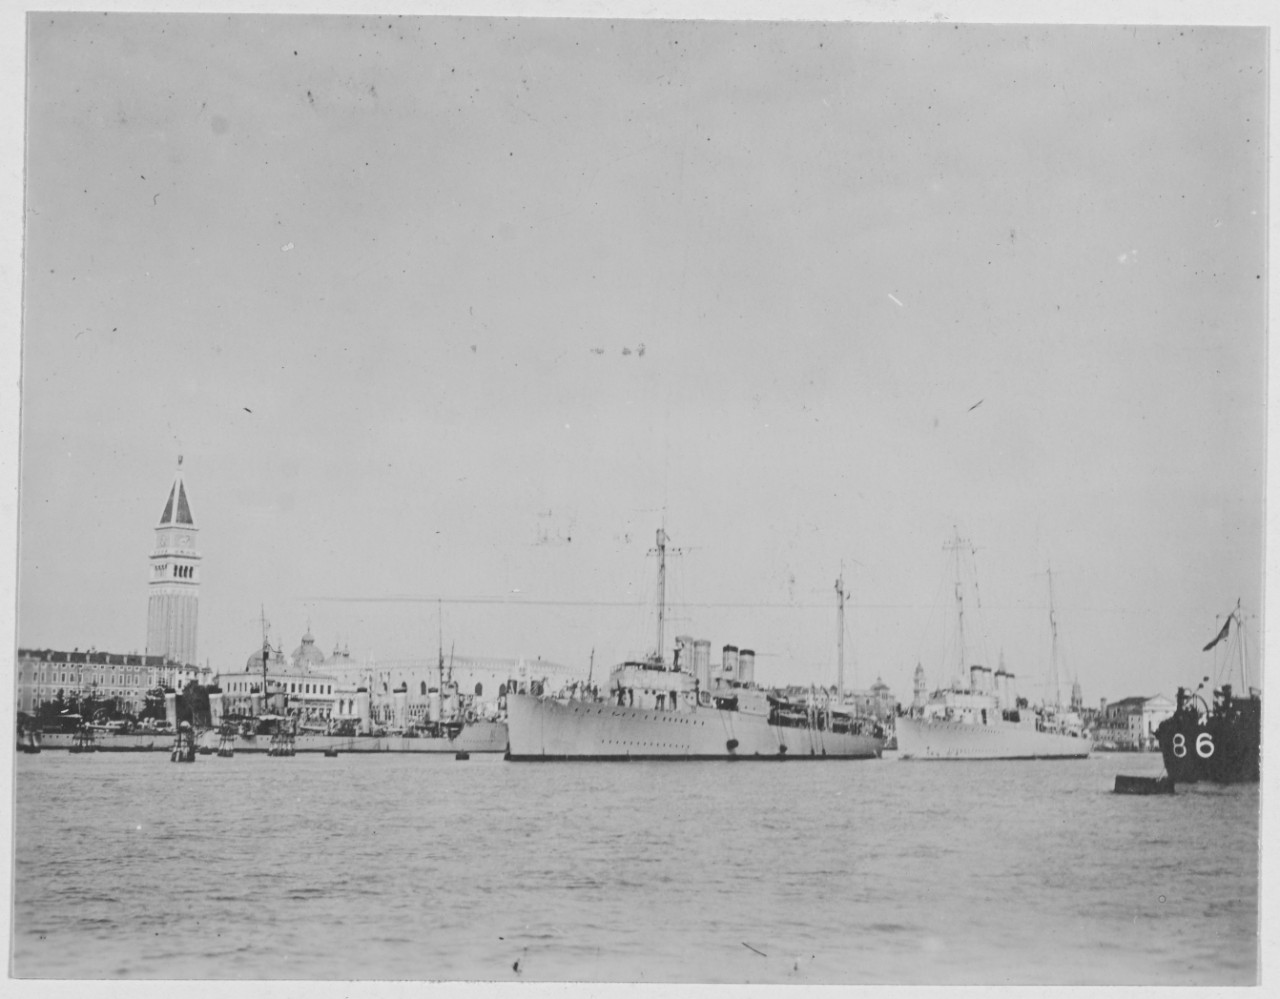 U.S. Destroyers in Venice, Italy